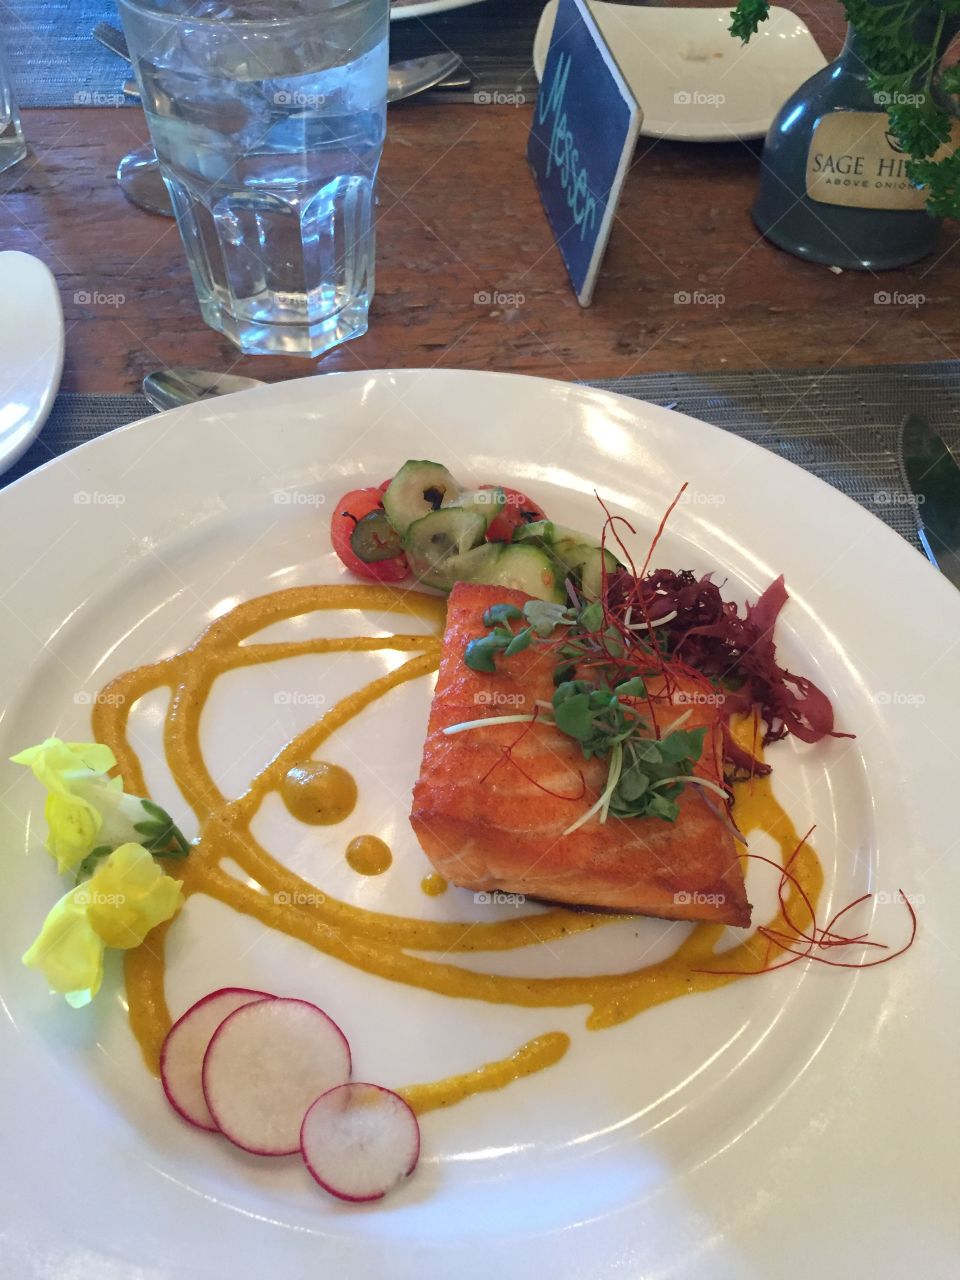 Beautifully arranged plate with salmon, radishes, a mustard sauce of sorts, and pretty garnishes. 